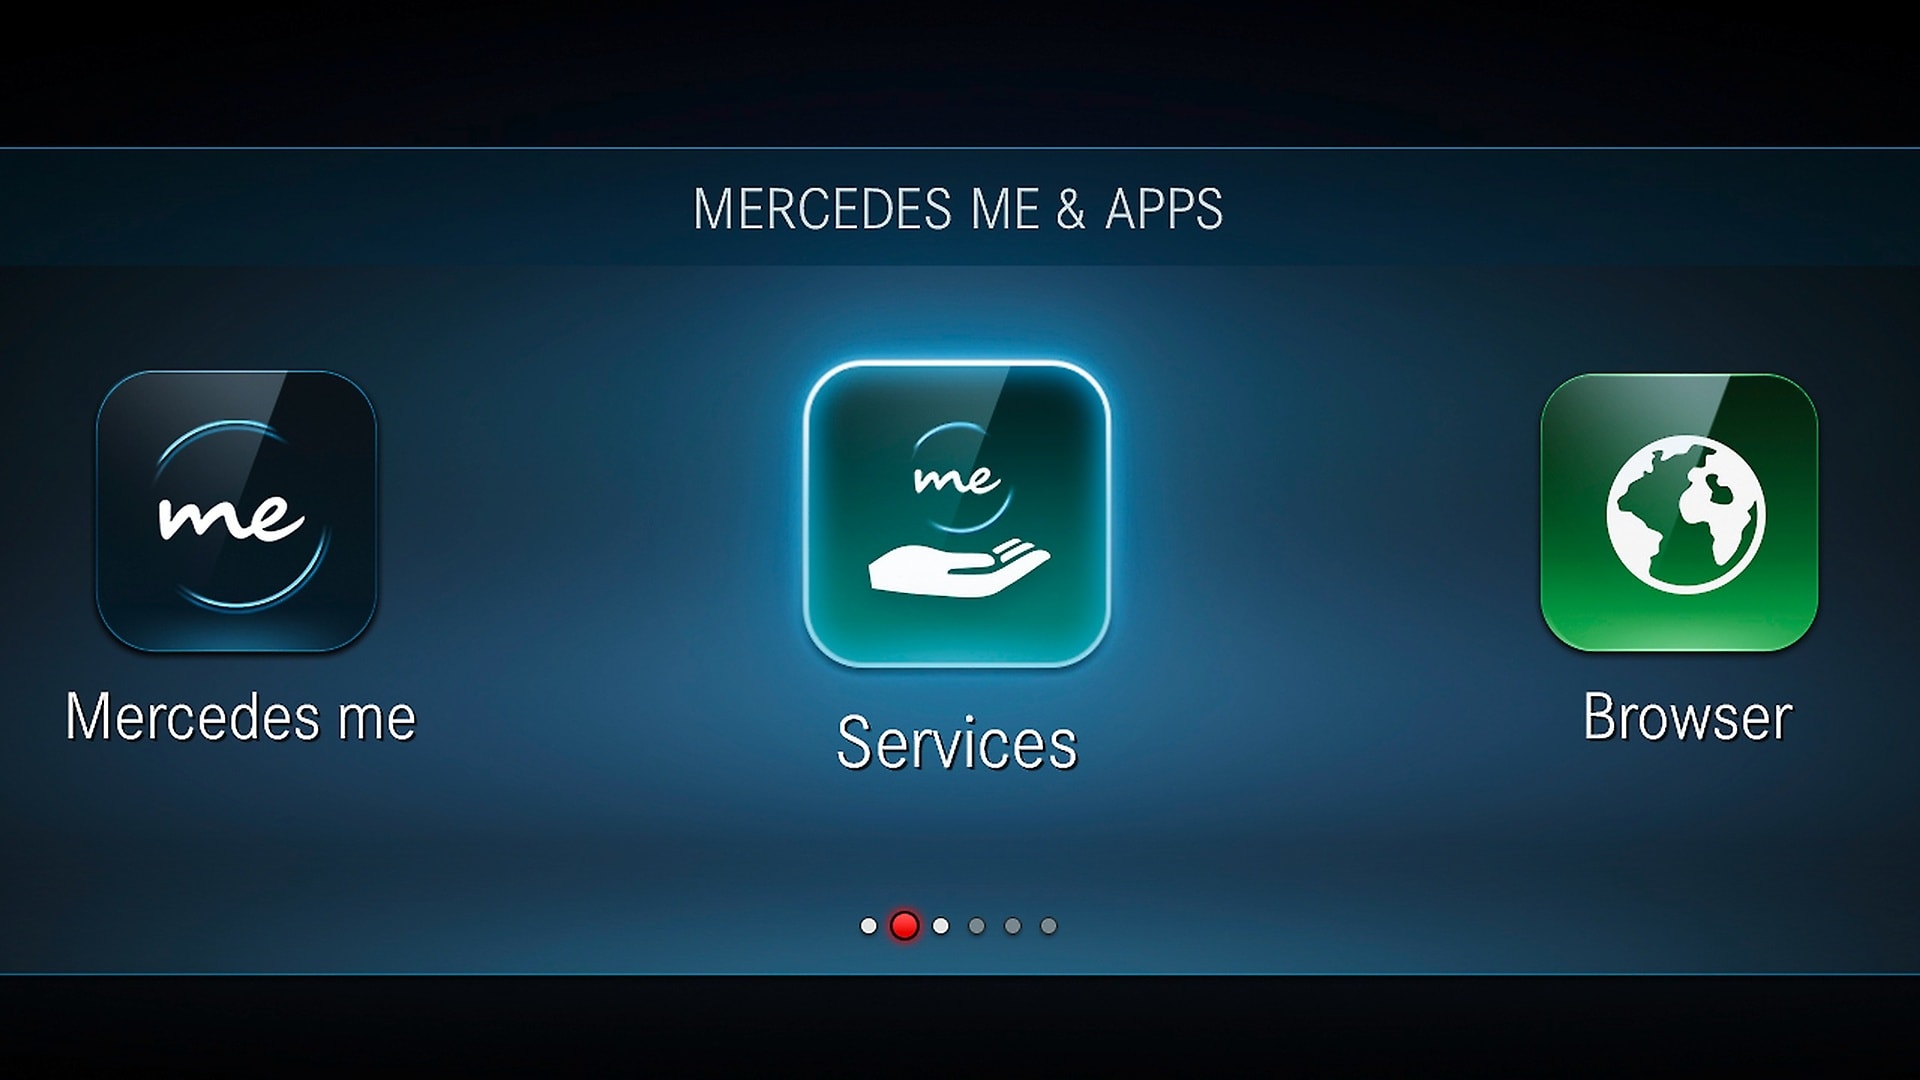 The infotainment system "MBUX" (Mercedes-Benz User Experience). Innovative technology based on artificial intelligence.